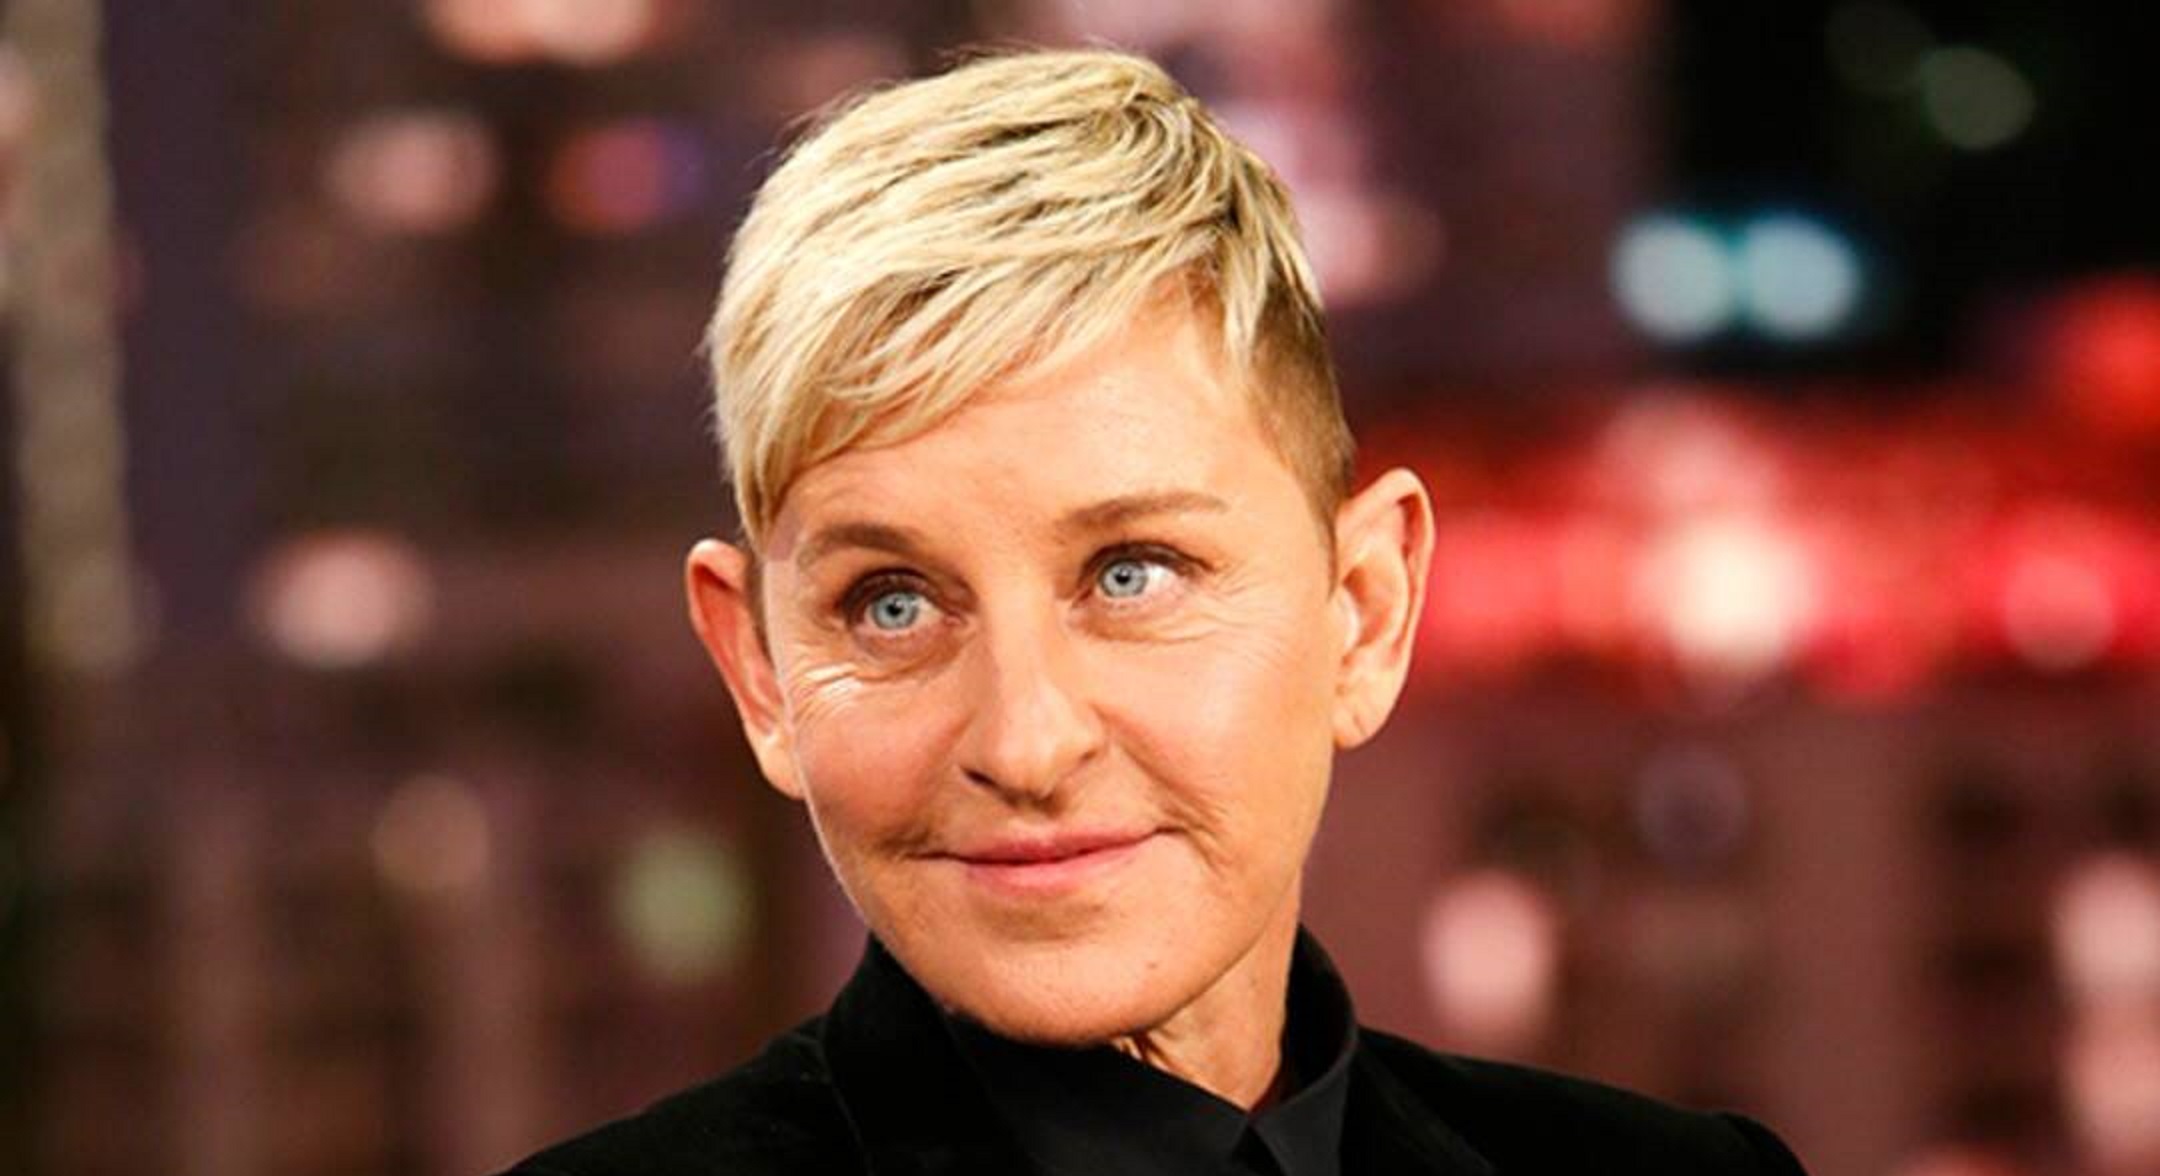 Ellen DeGeneres Premieres New Season, Addresses All Allegations About ‘Toxic Workplace’ [Video]